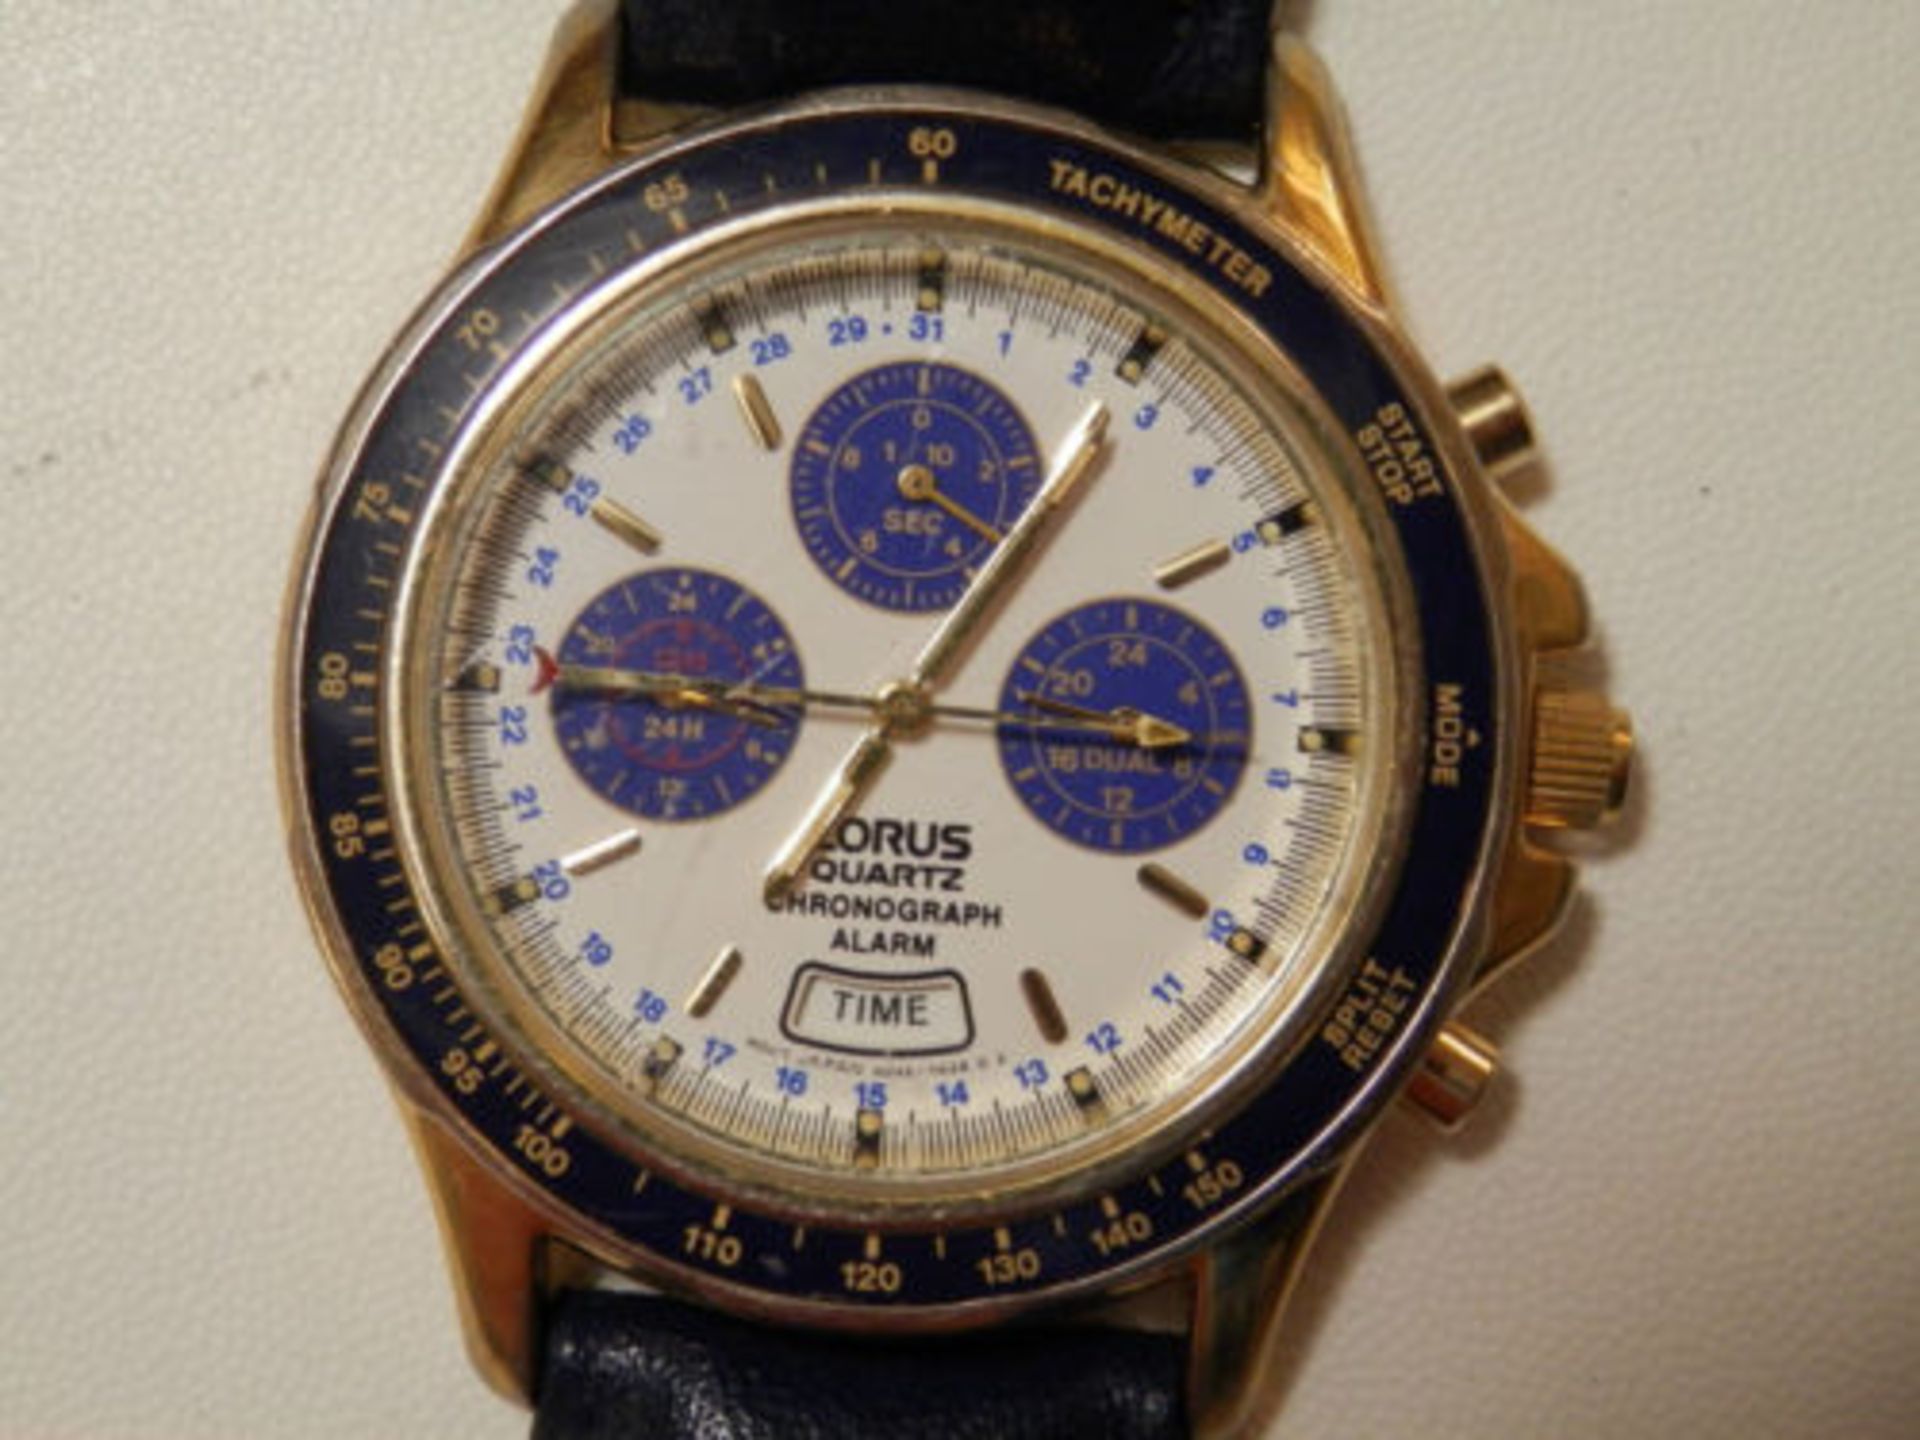 RETRO GENTS LORUS 1990S MINI DIAL CHRONOGRAPH, ALARM, DATE WATCH. KEEPING TIME. - Image 10 of 11